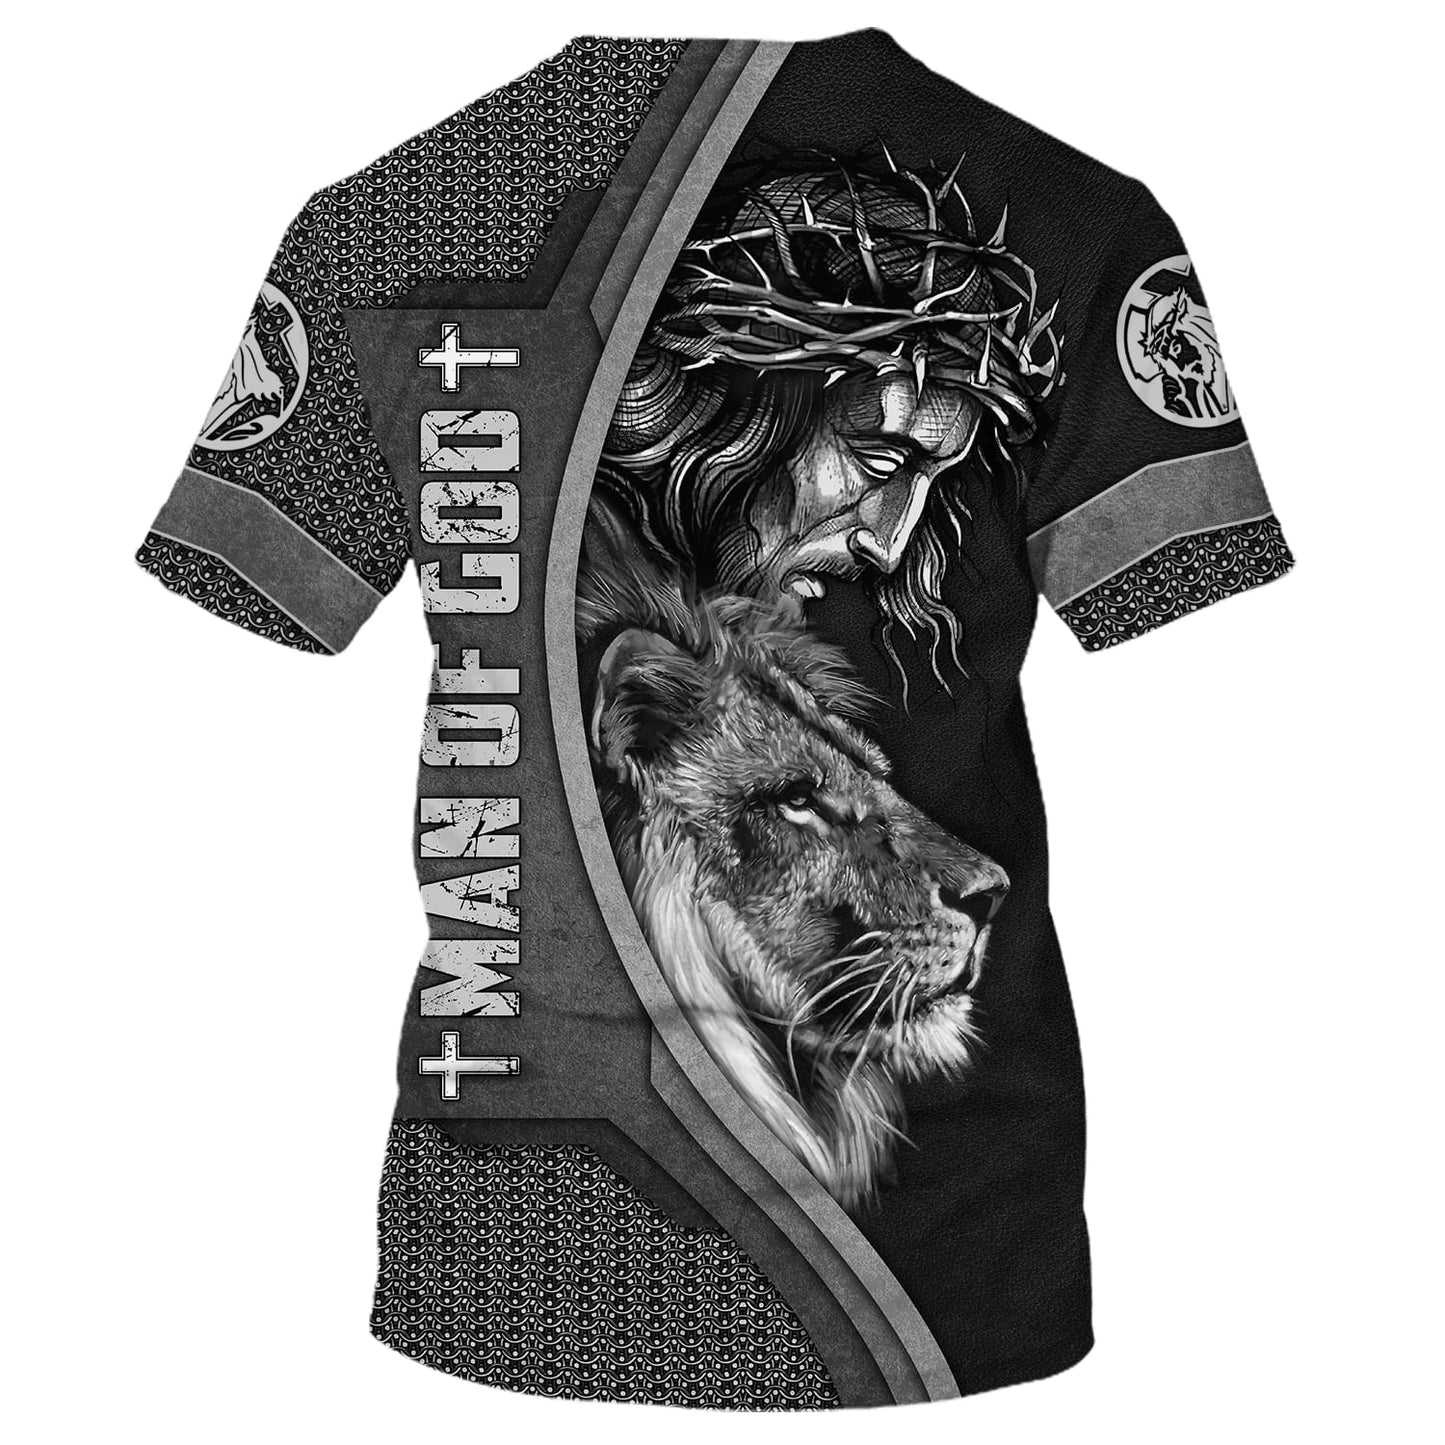 Man Of God Jesus And The Lion Of Judah 3d T-Shirts - Christian Shirts For Men&Women